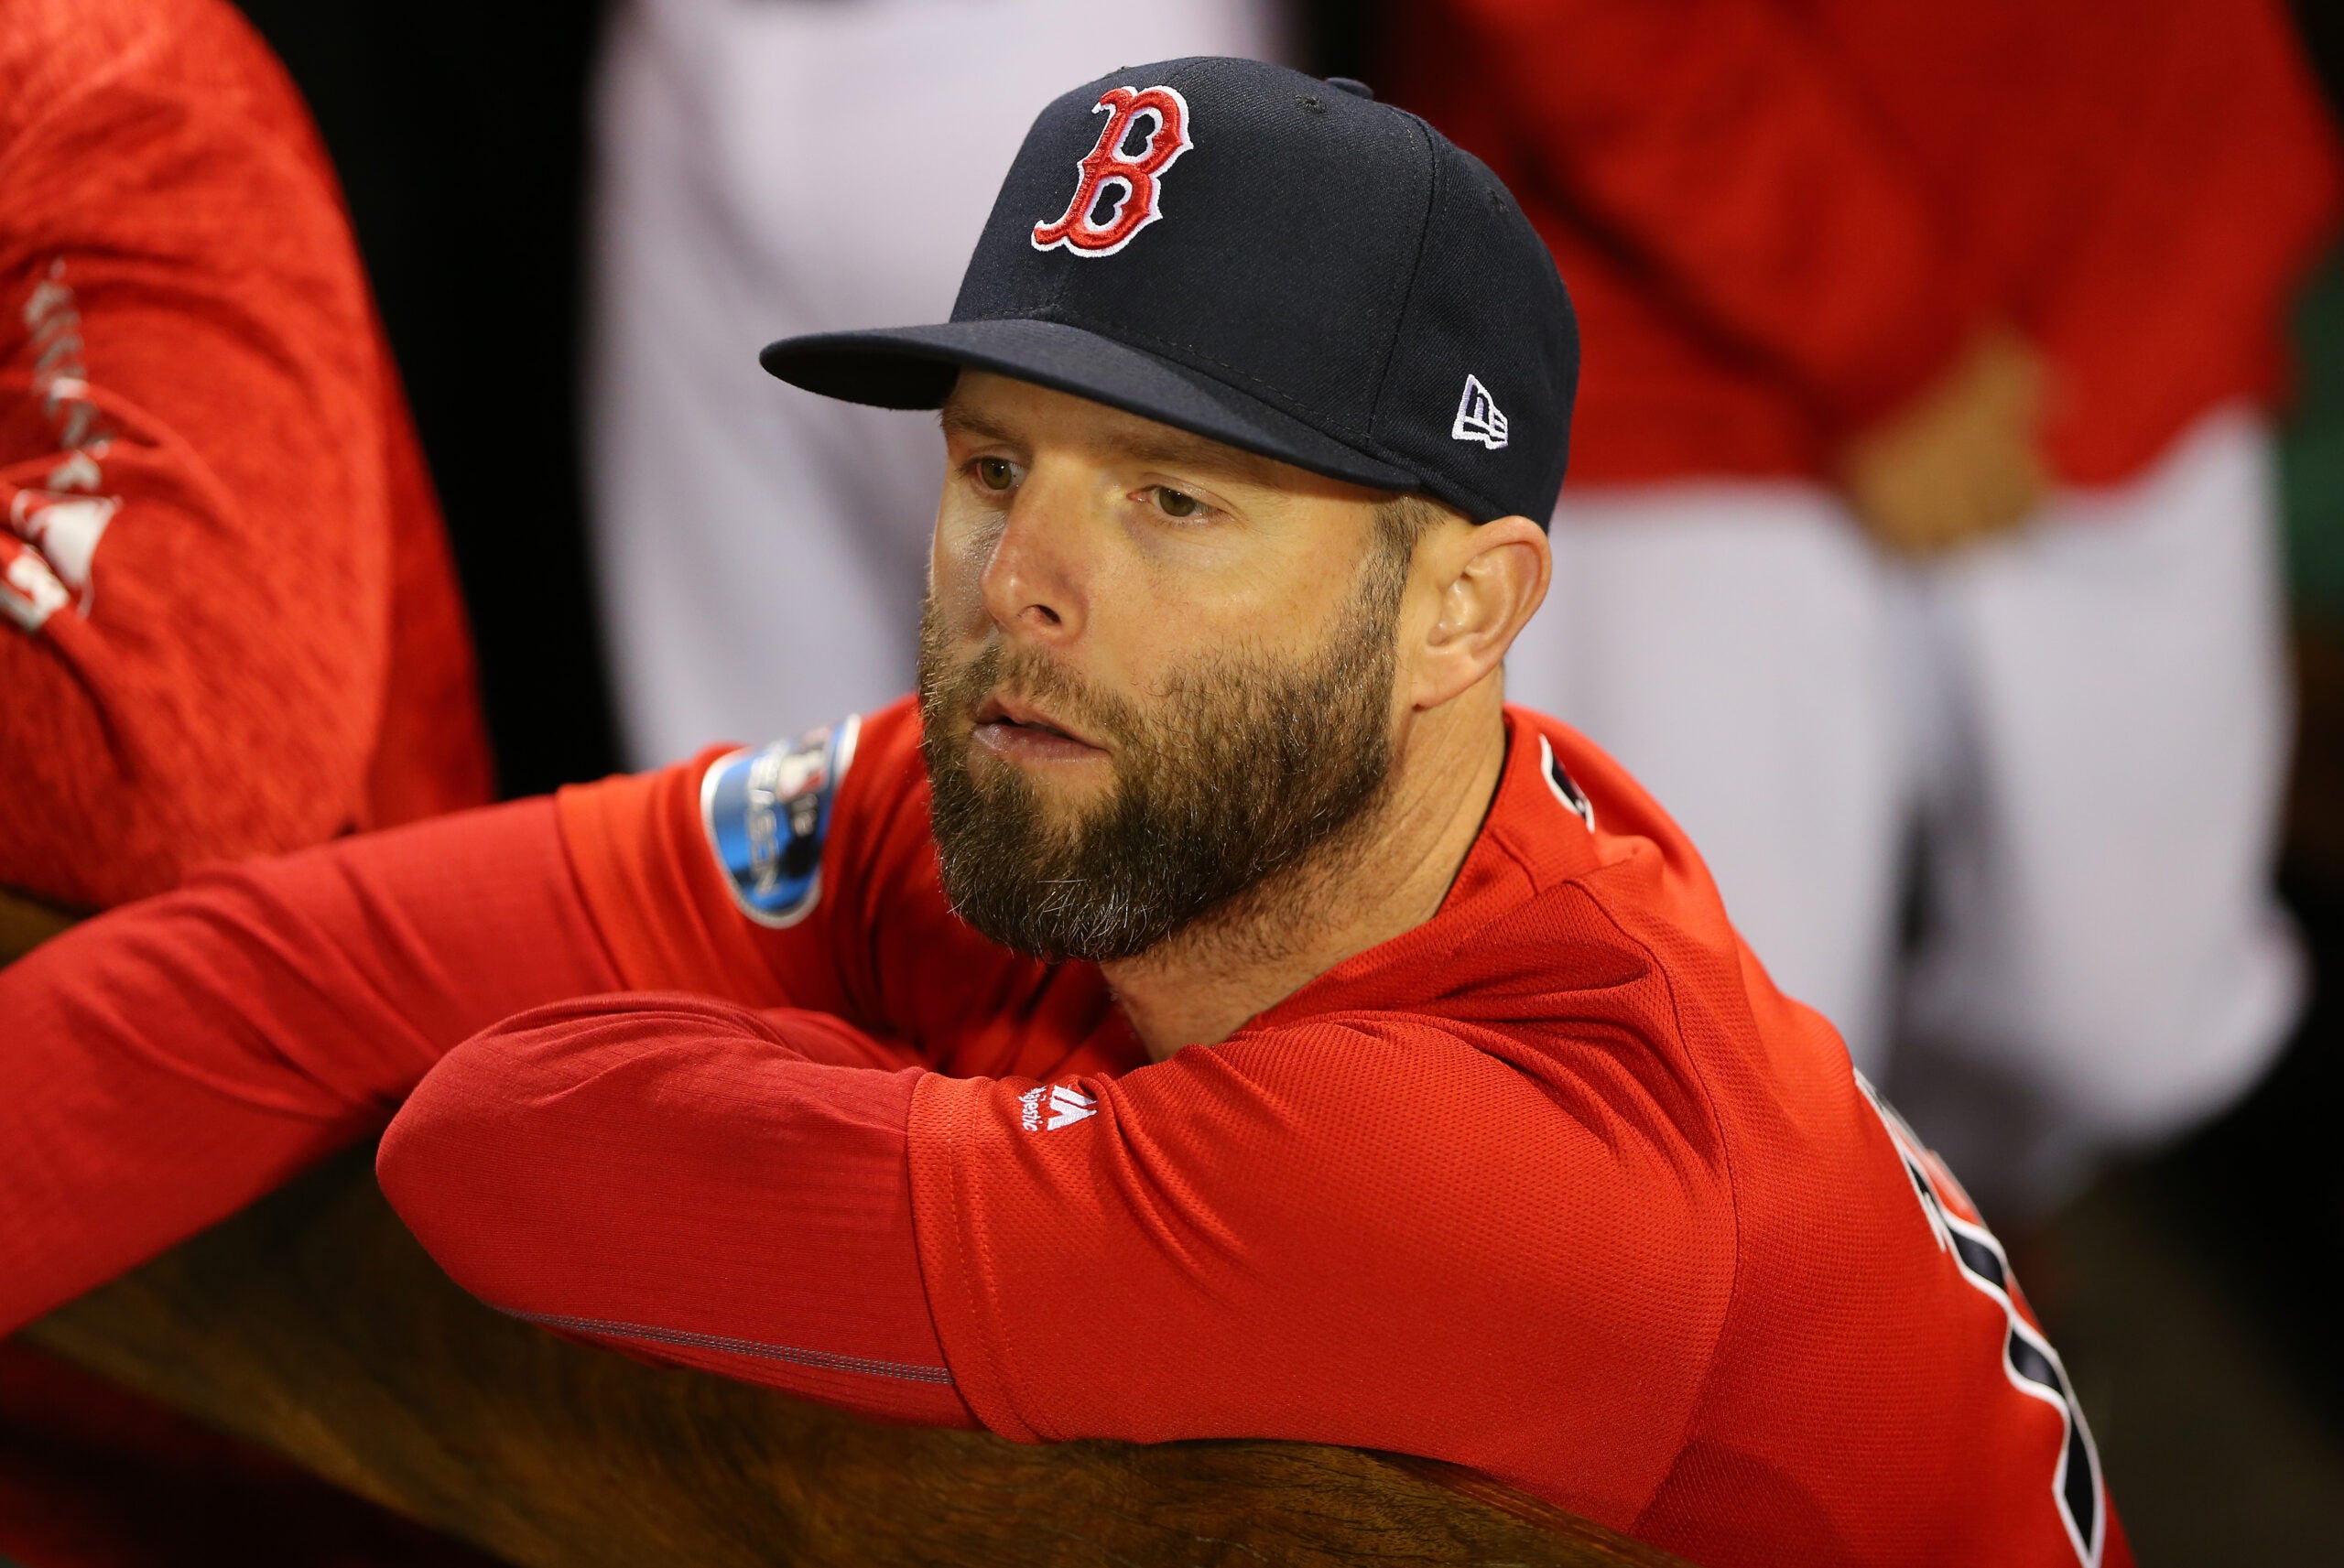 Dustin Pedroia Team Issued 2018 World Series Road Jersey